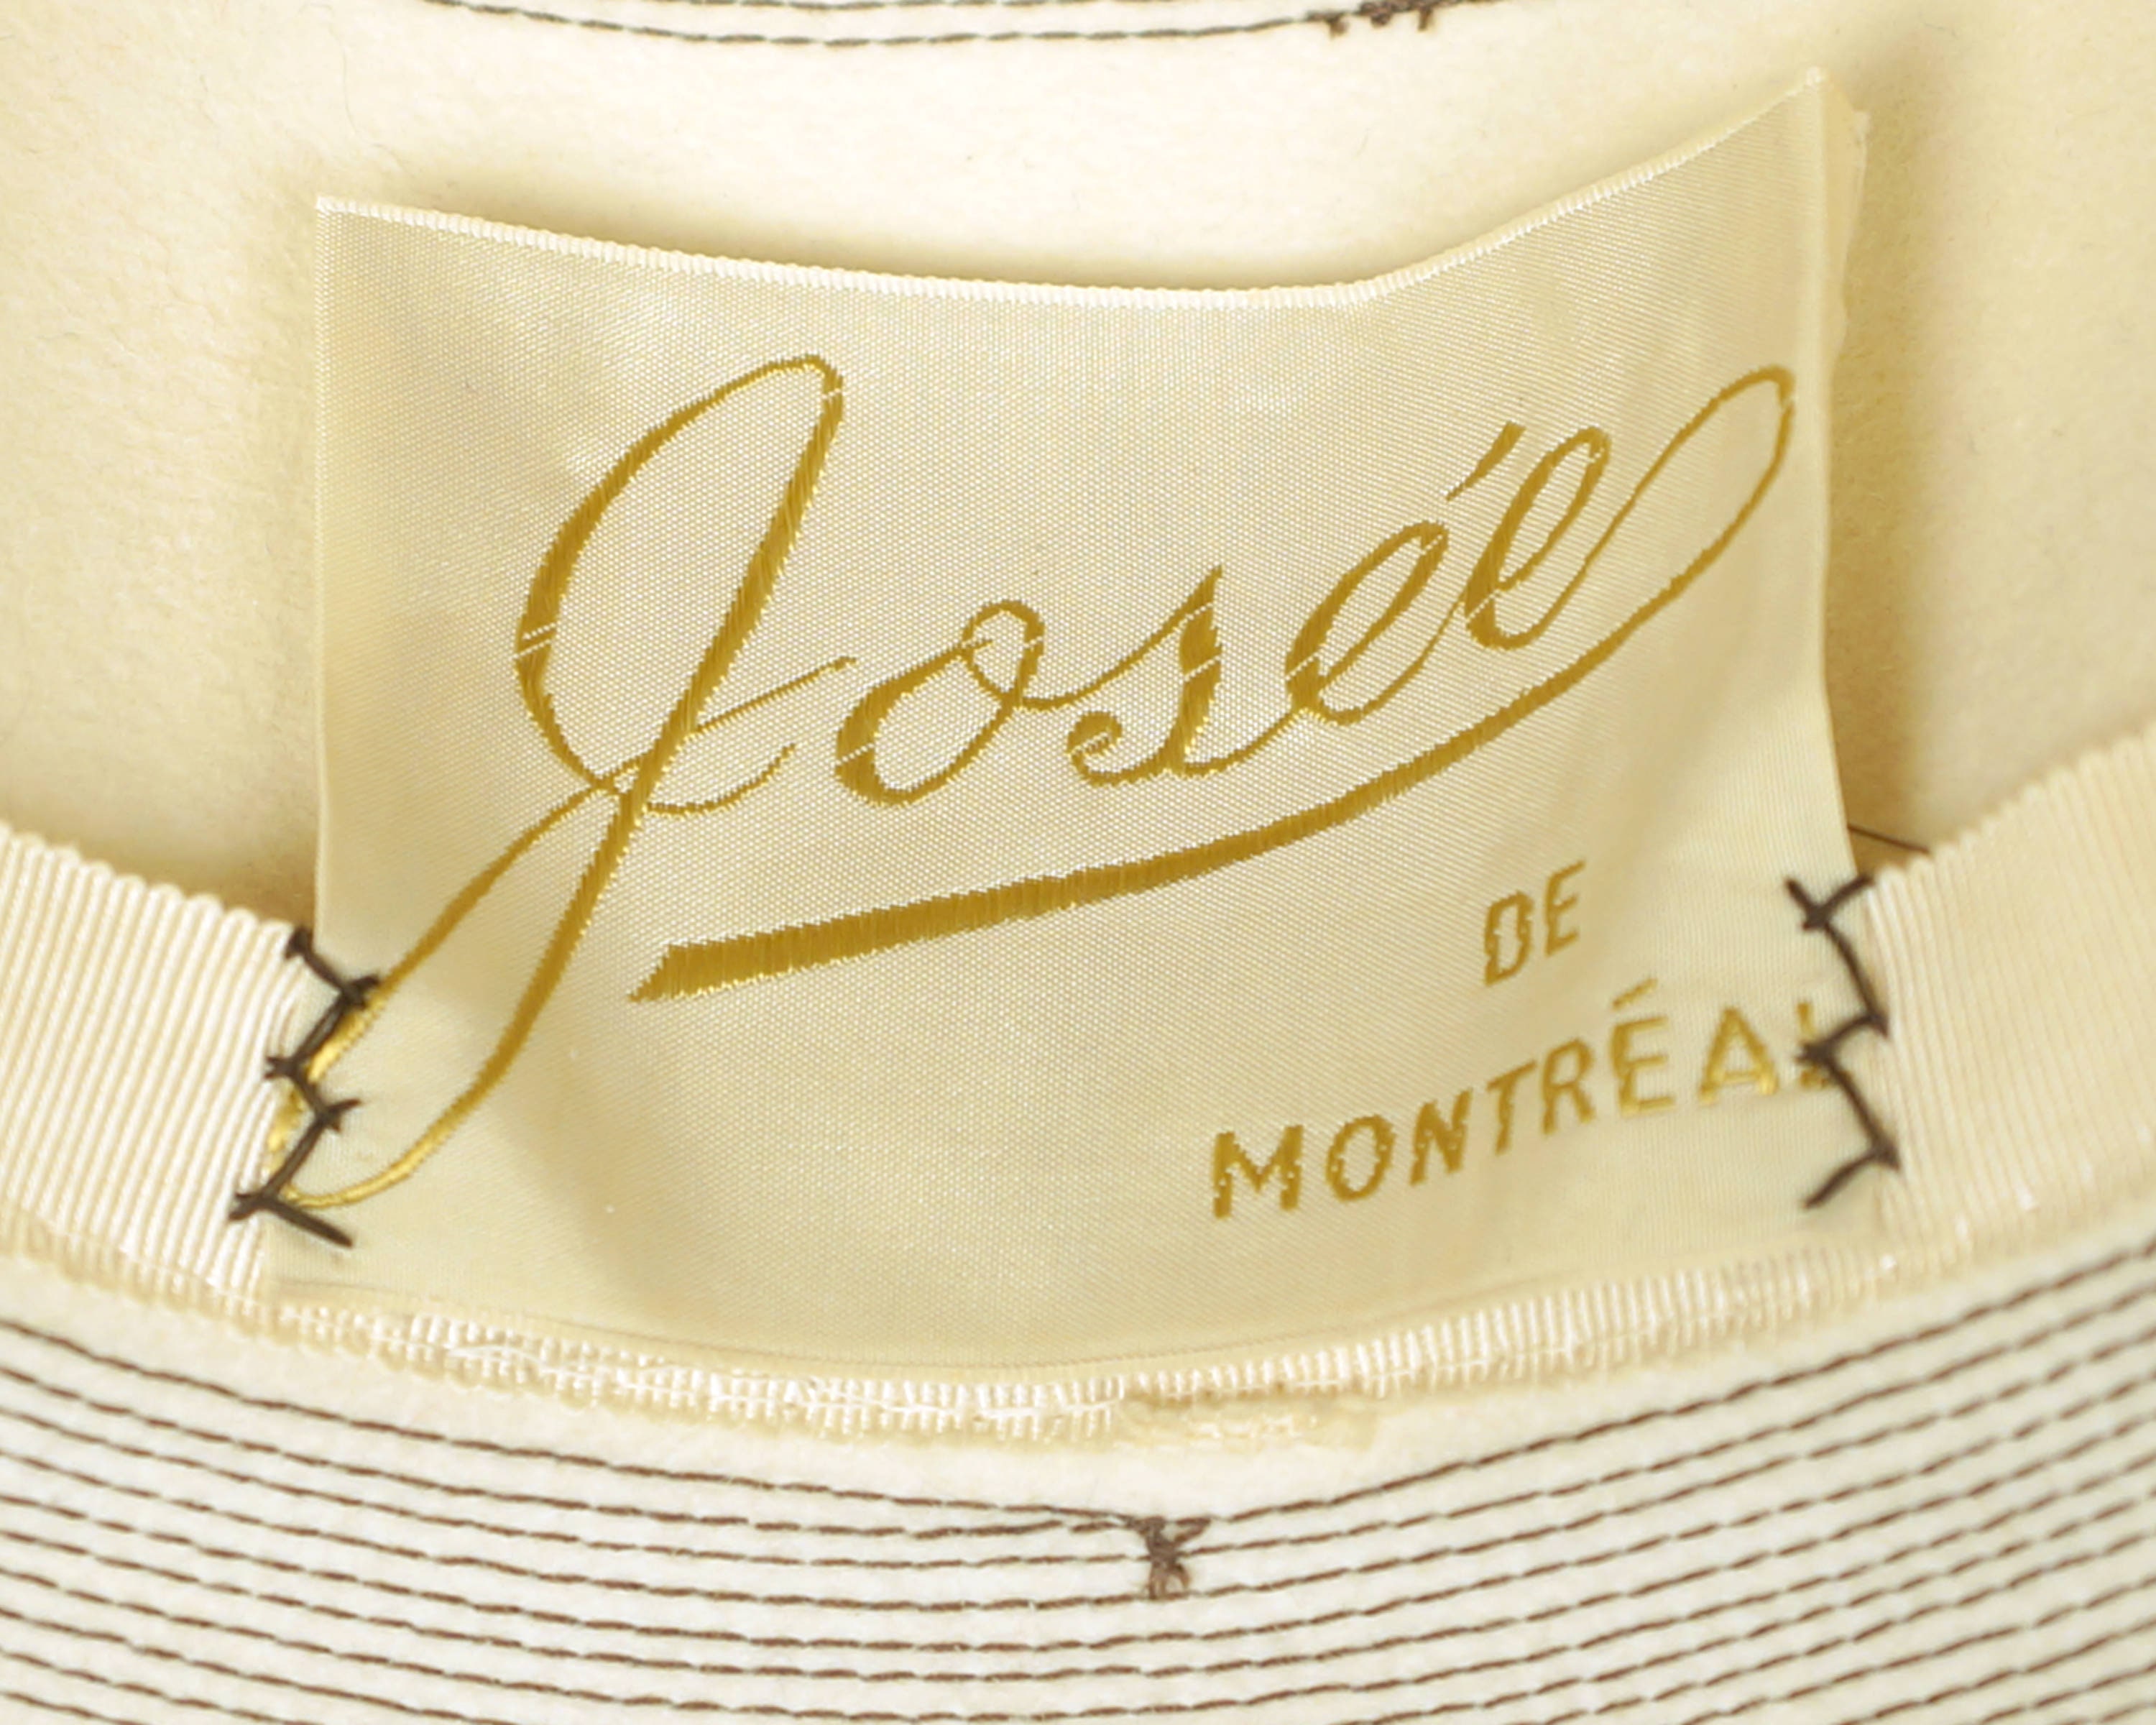 Vintage 1960s Bucket Hat with High Crown Off White Felt Josee Montreal Size M - VFG